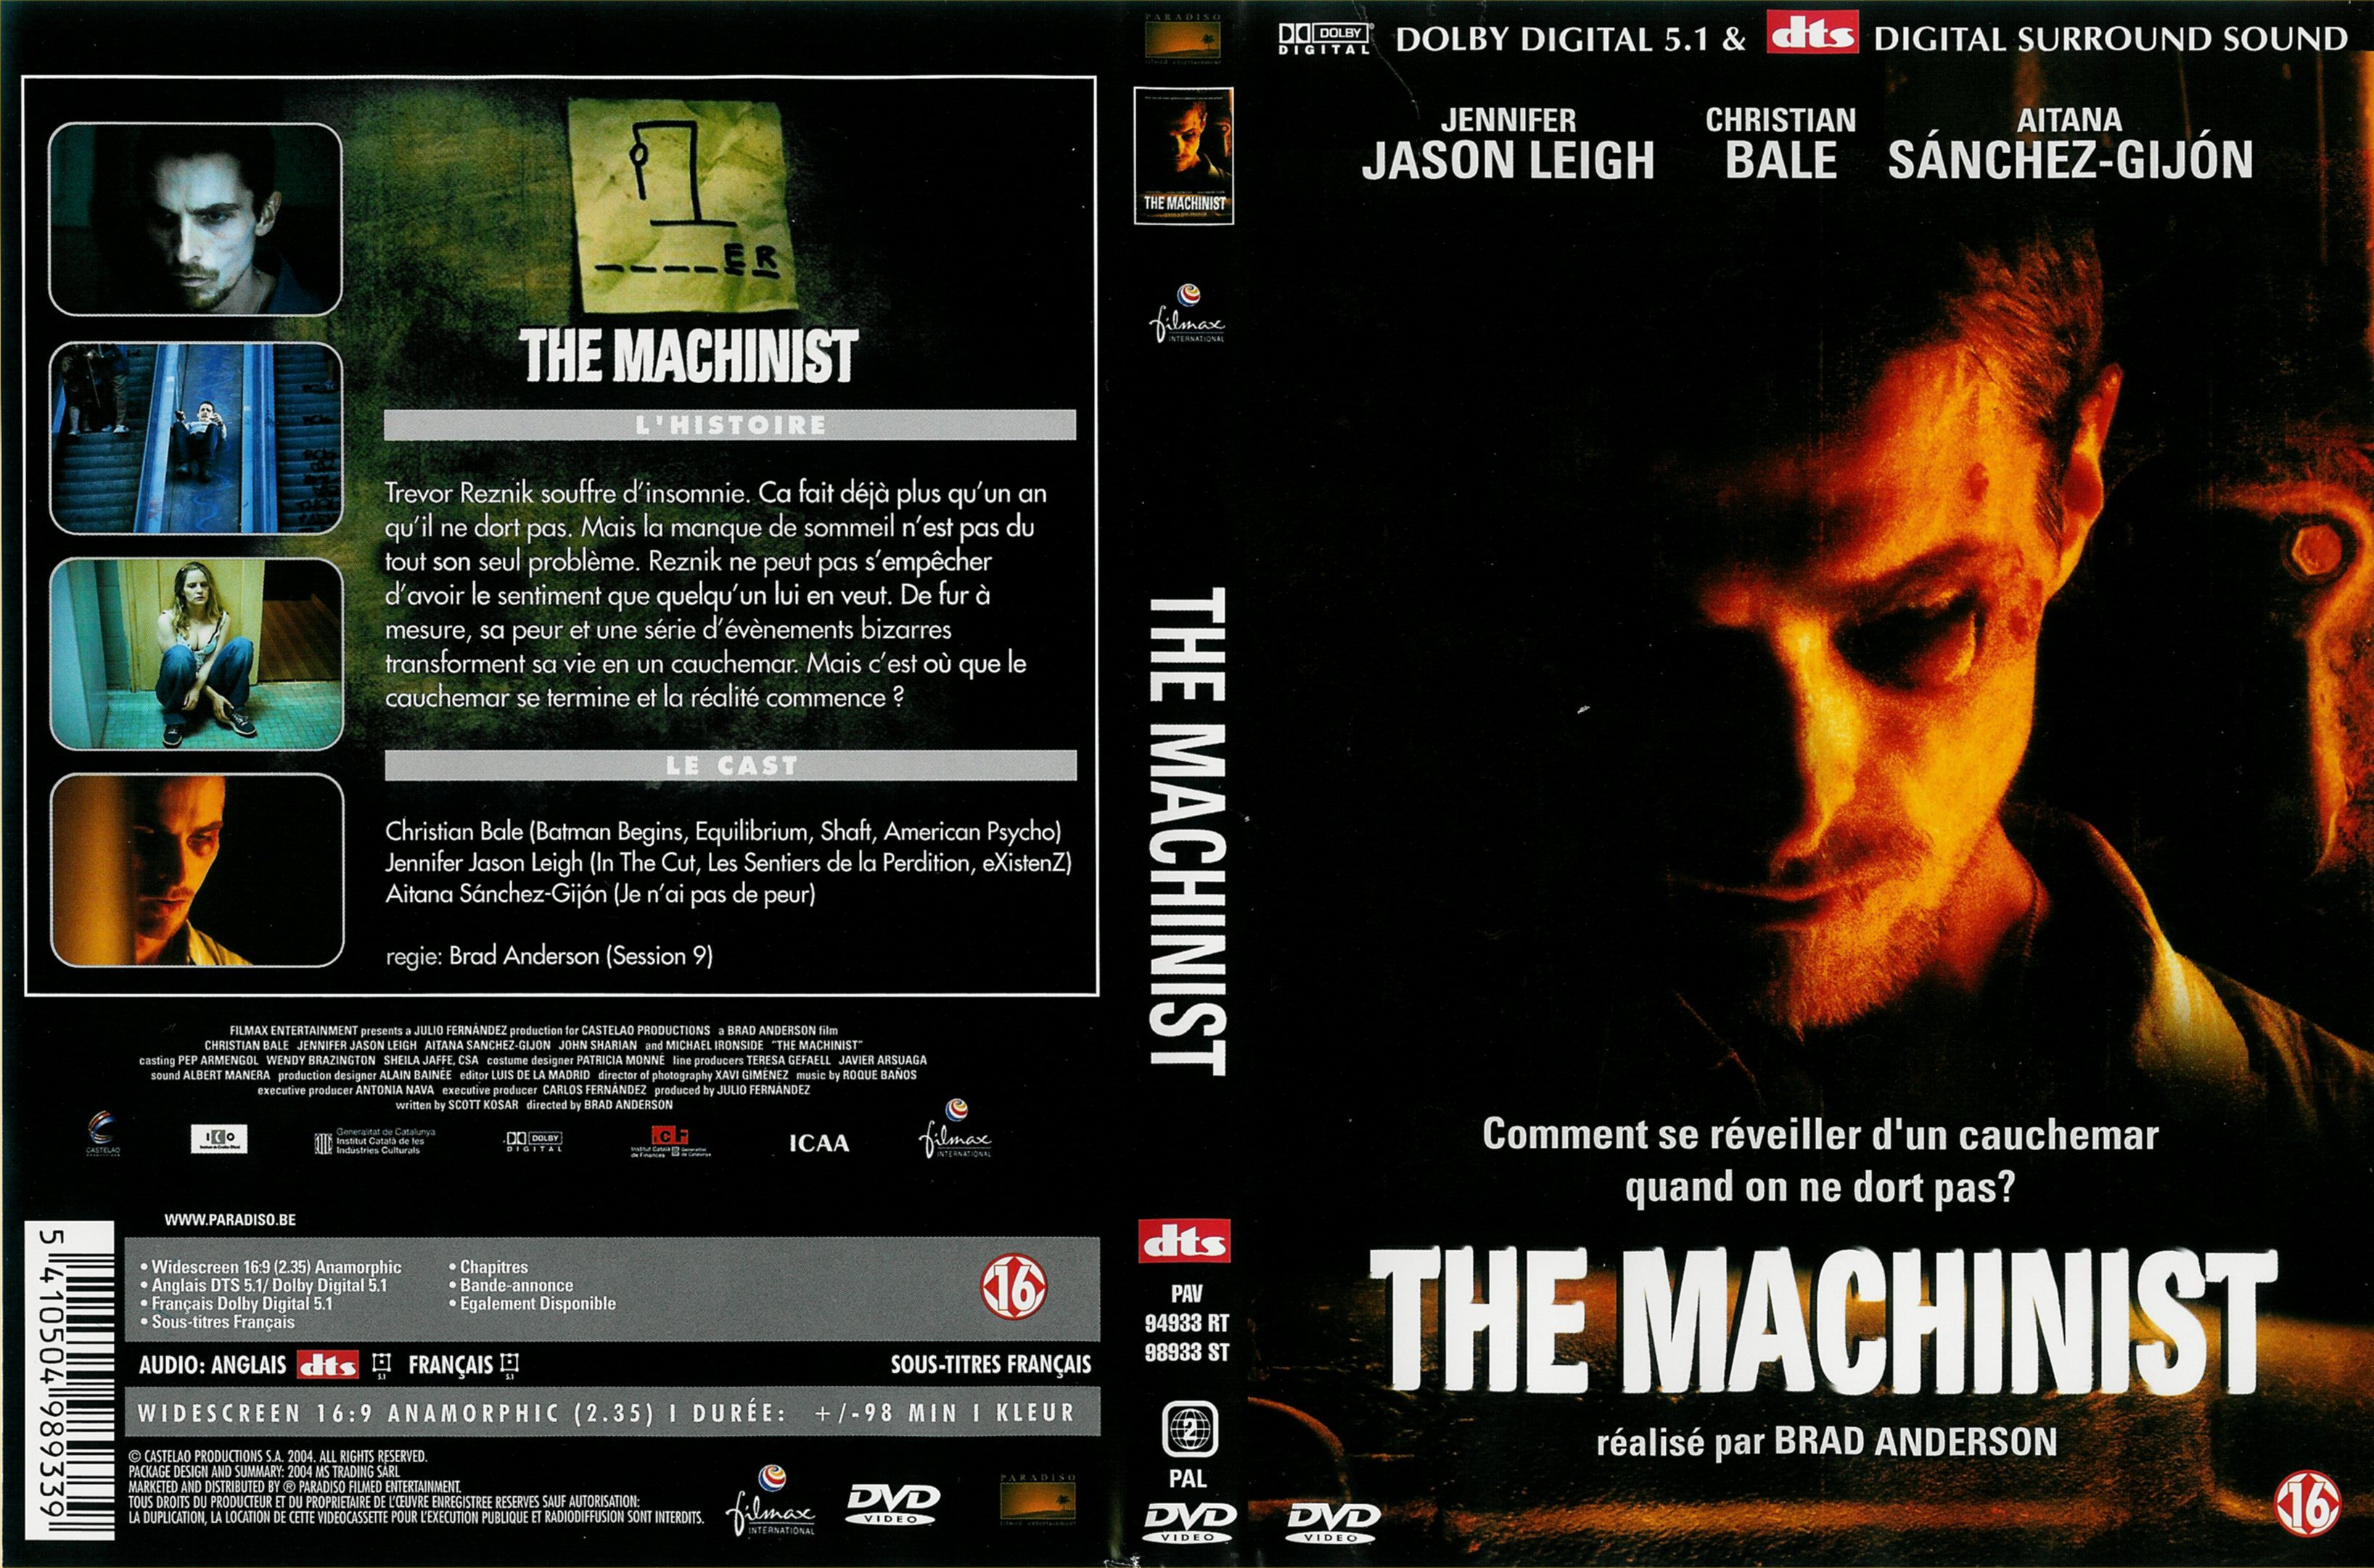 Jaquette DVD The Machinist